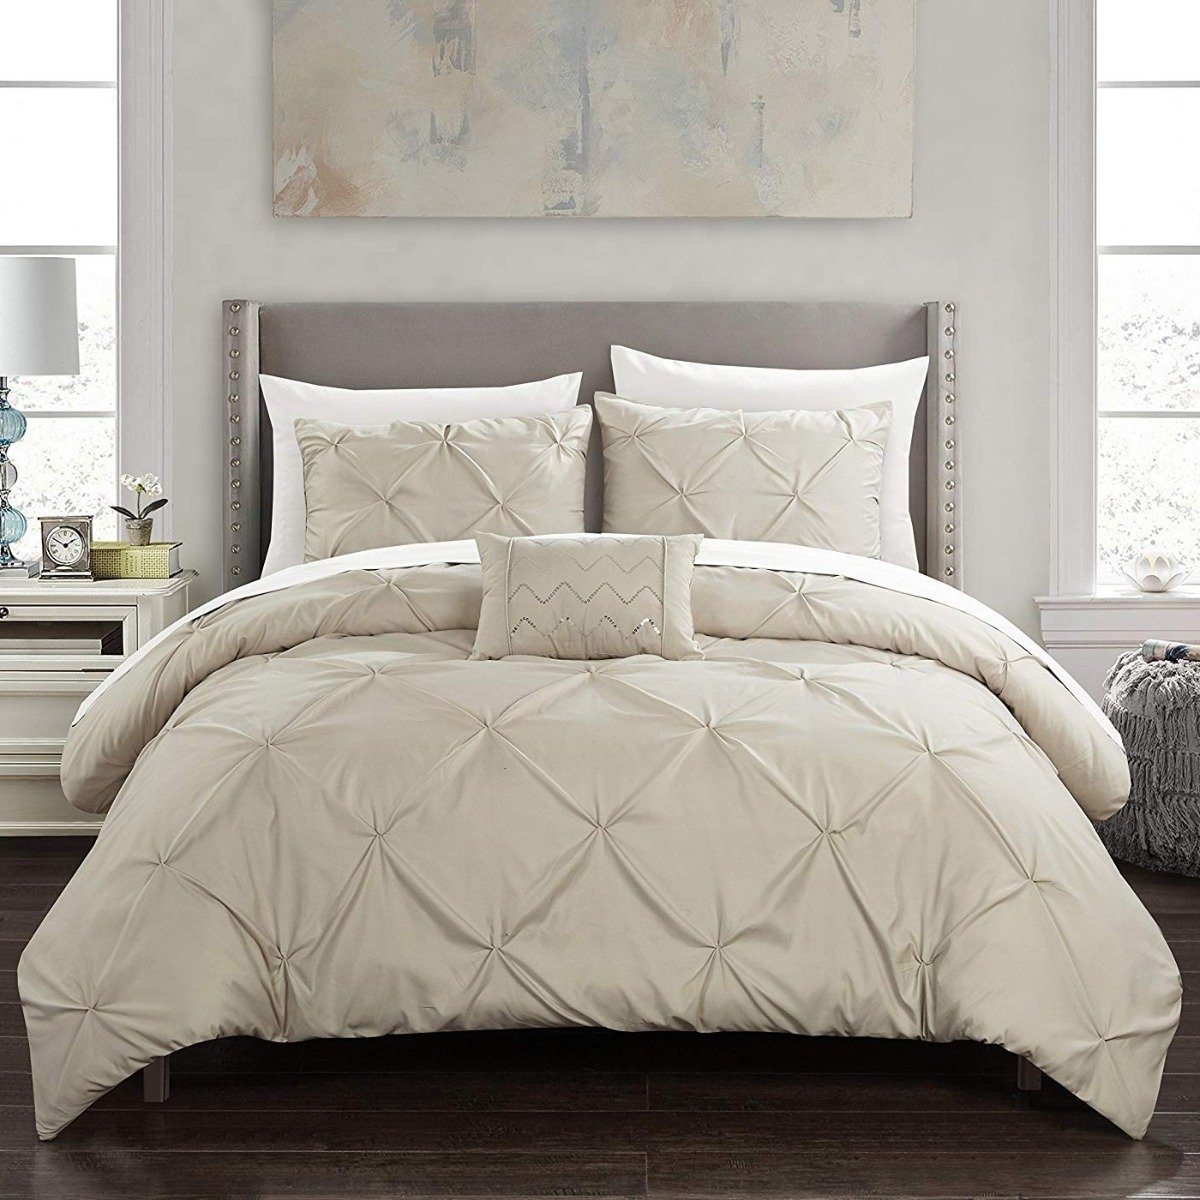 Armi Pinch-Pleated Microfiber Duvet Cover Set / Taupe / King